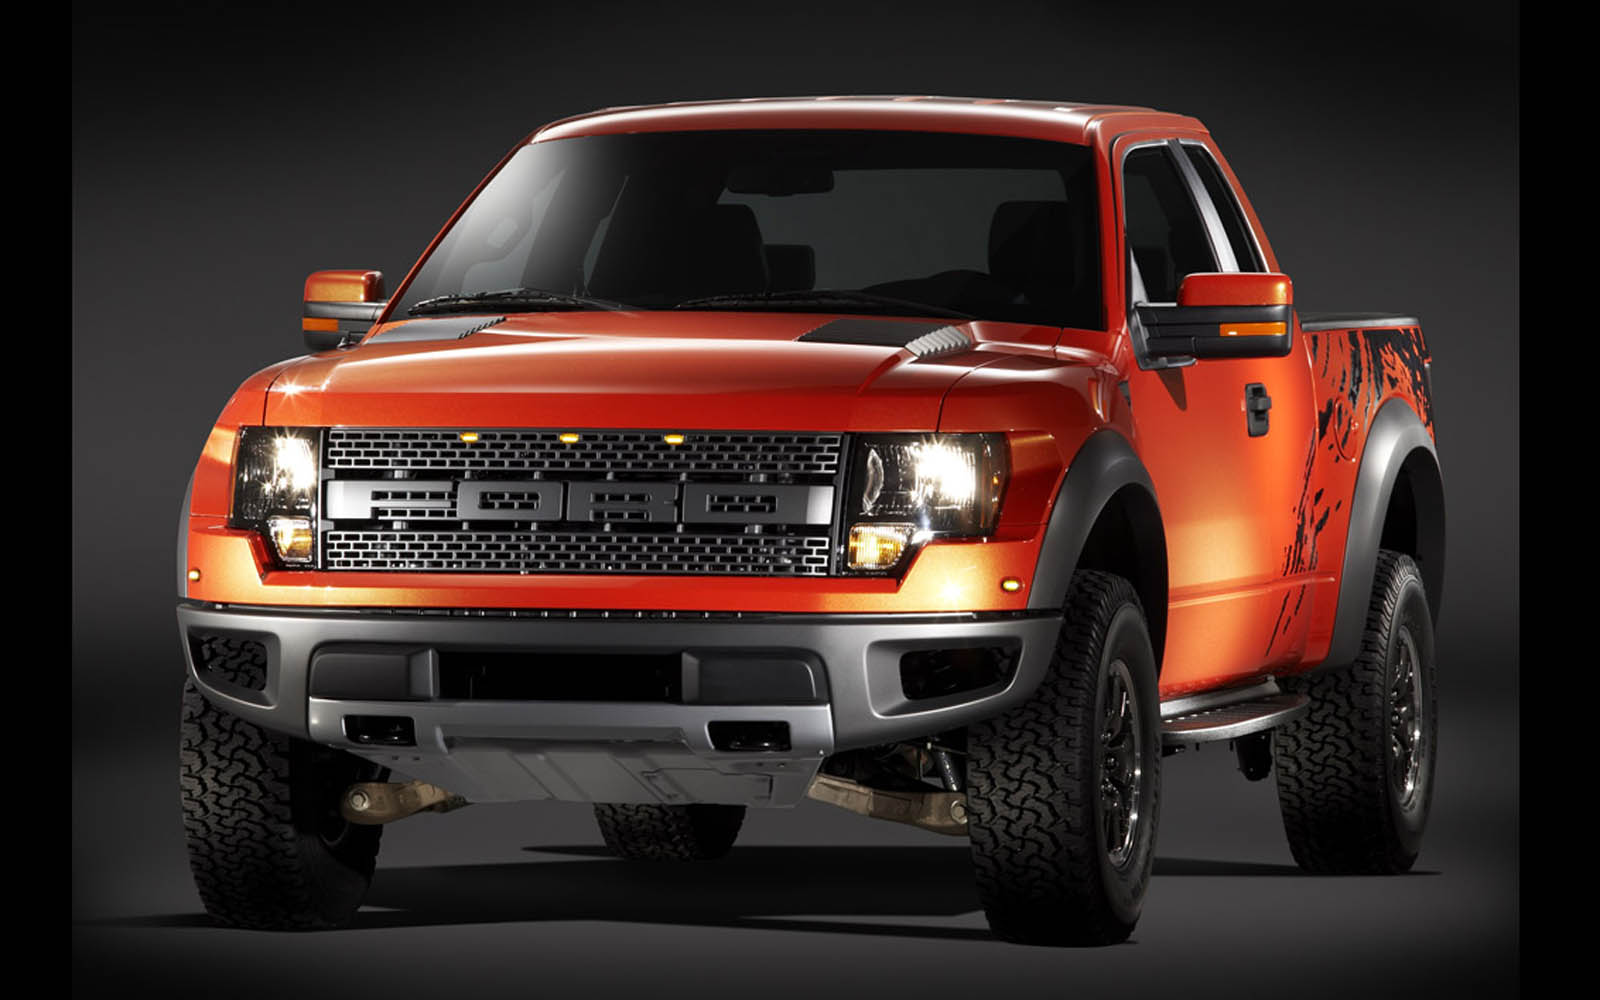 Tag Ford F Svt Raptor Wallpaper Image Paos And Pictures For